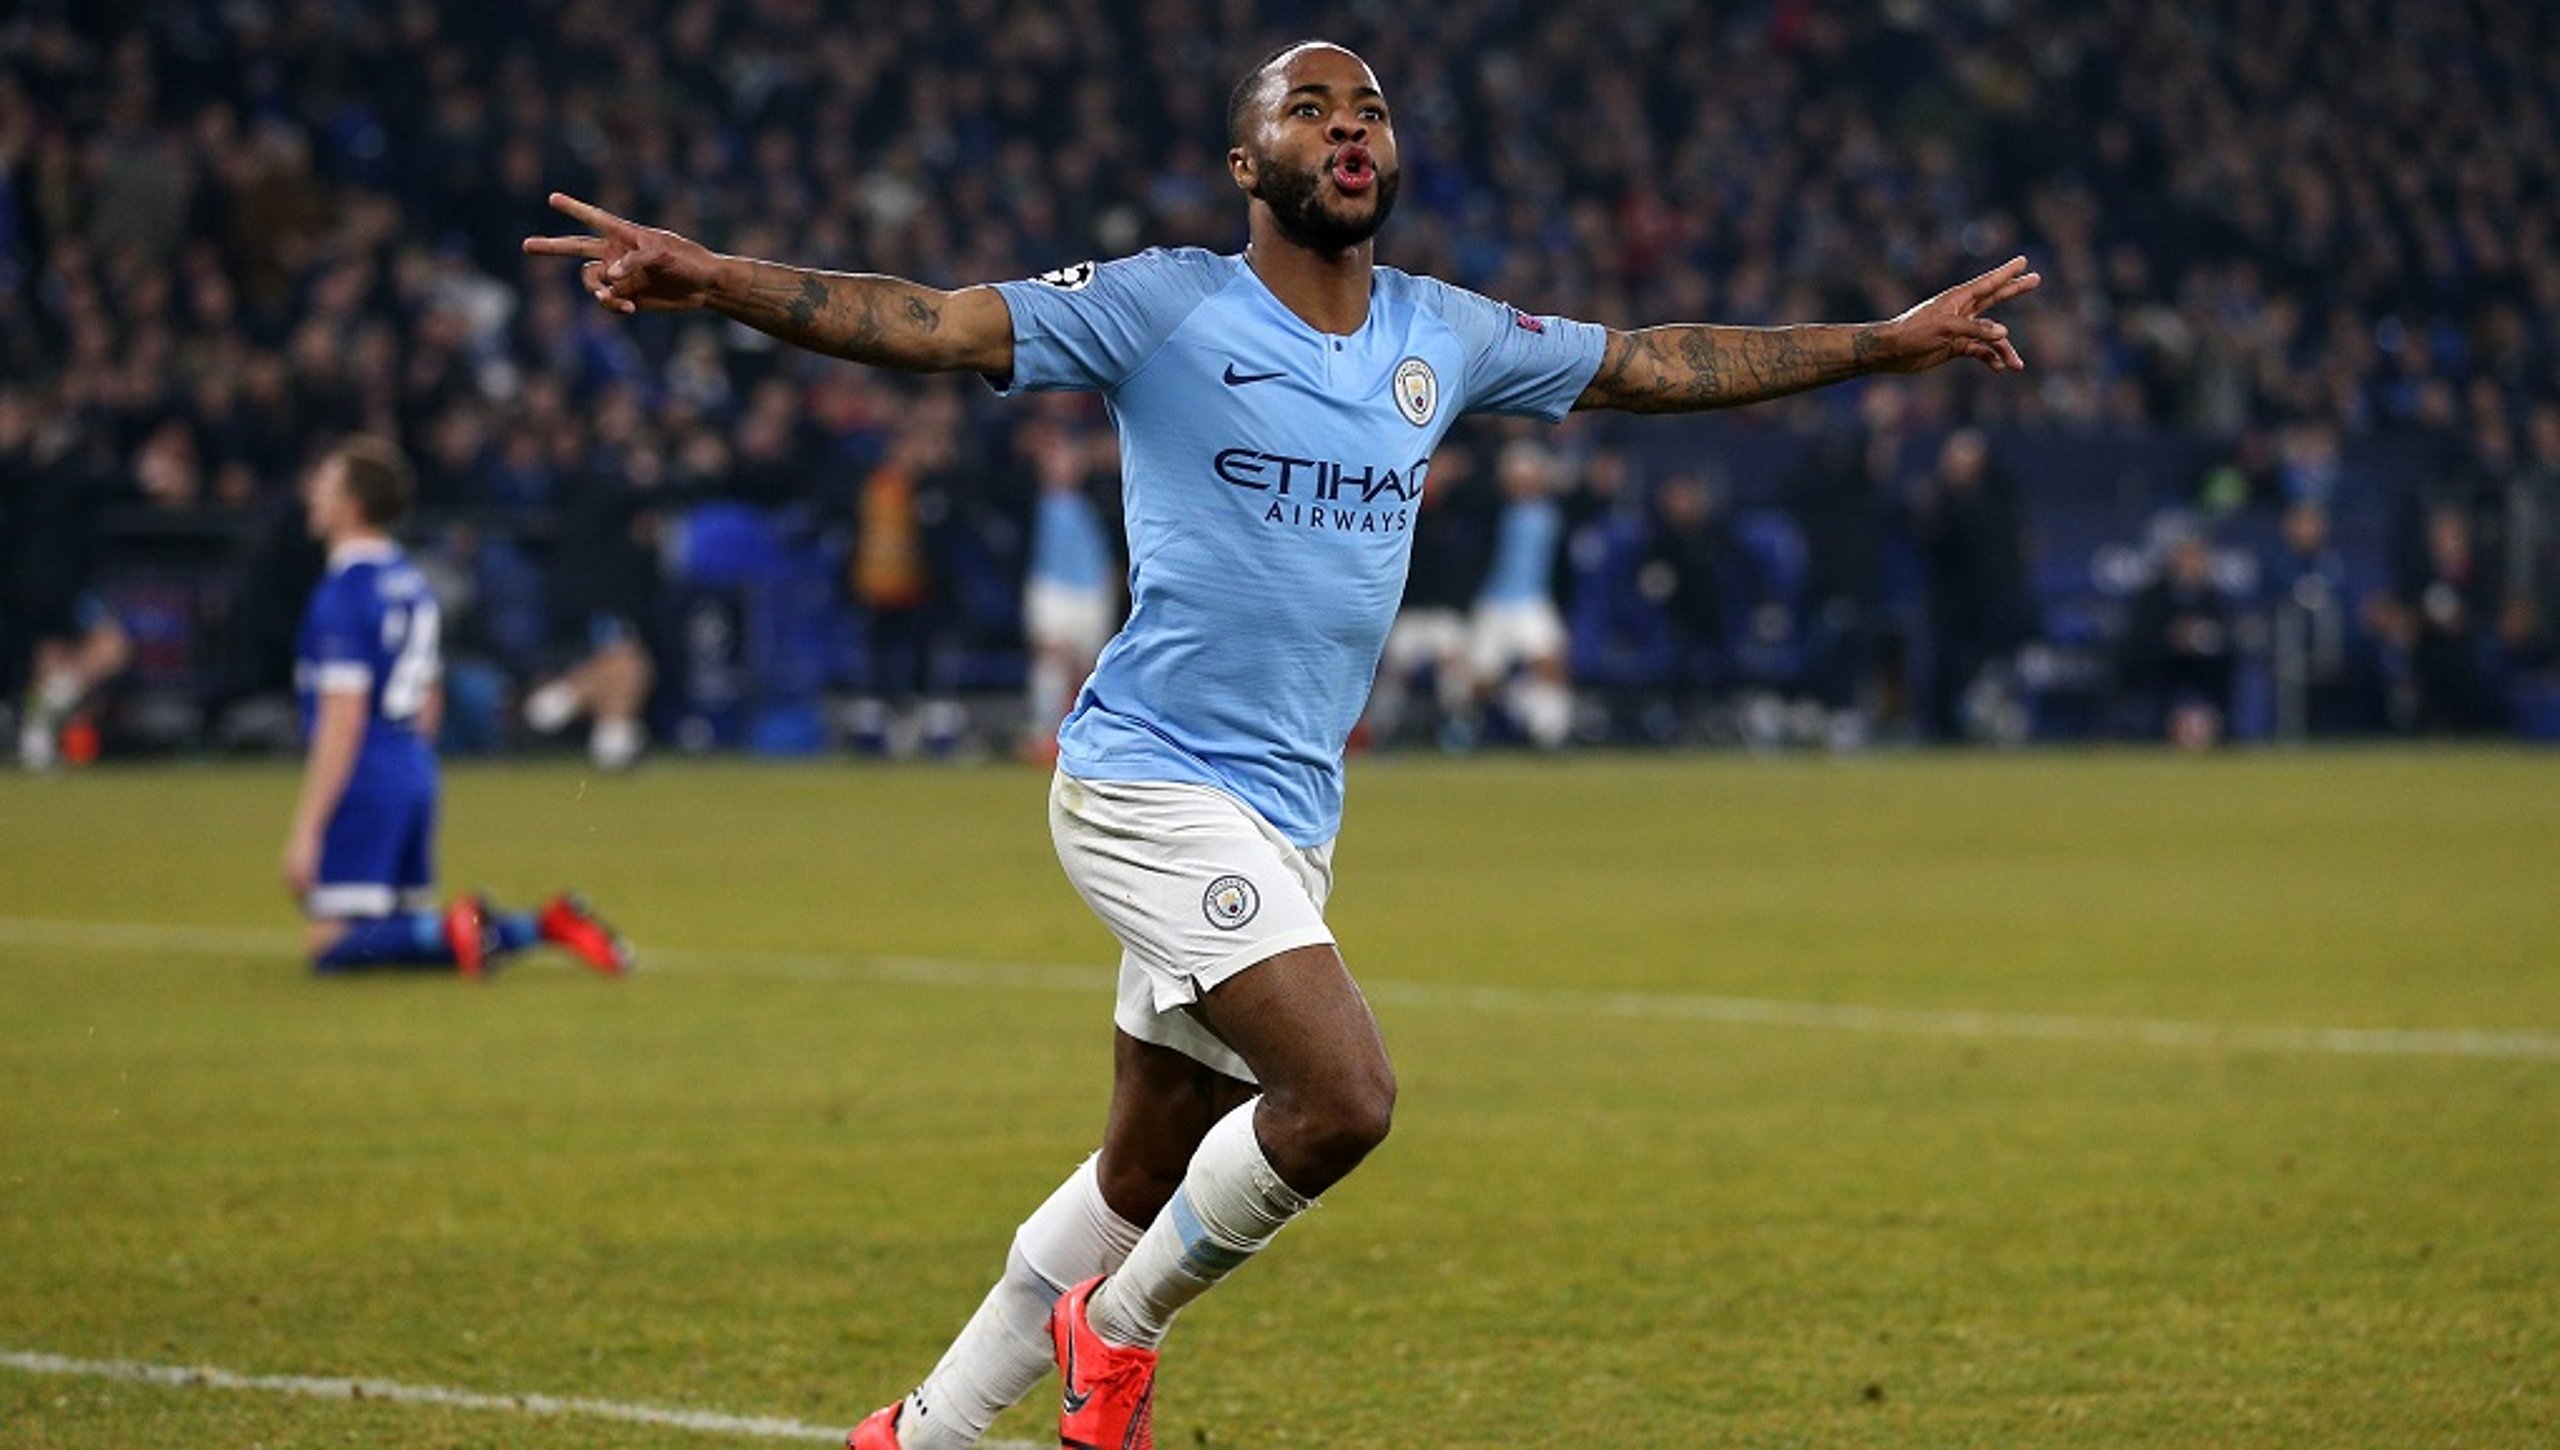 10-man City snatch victory with stunning late show